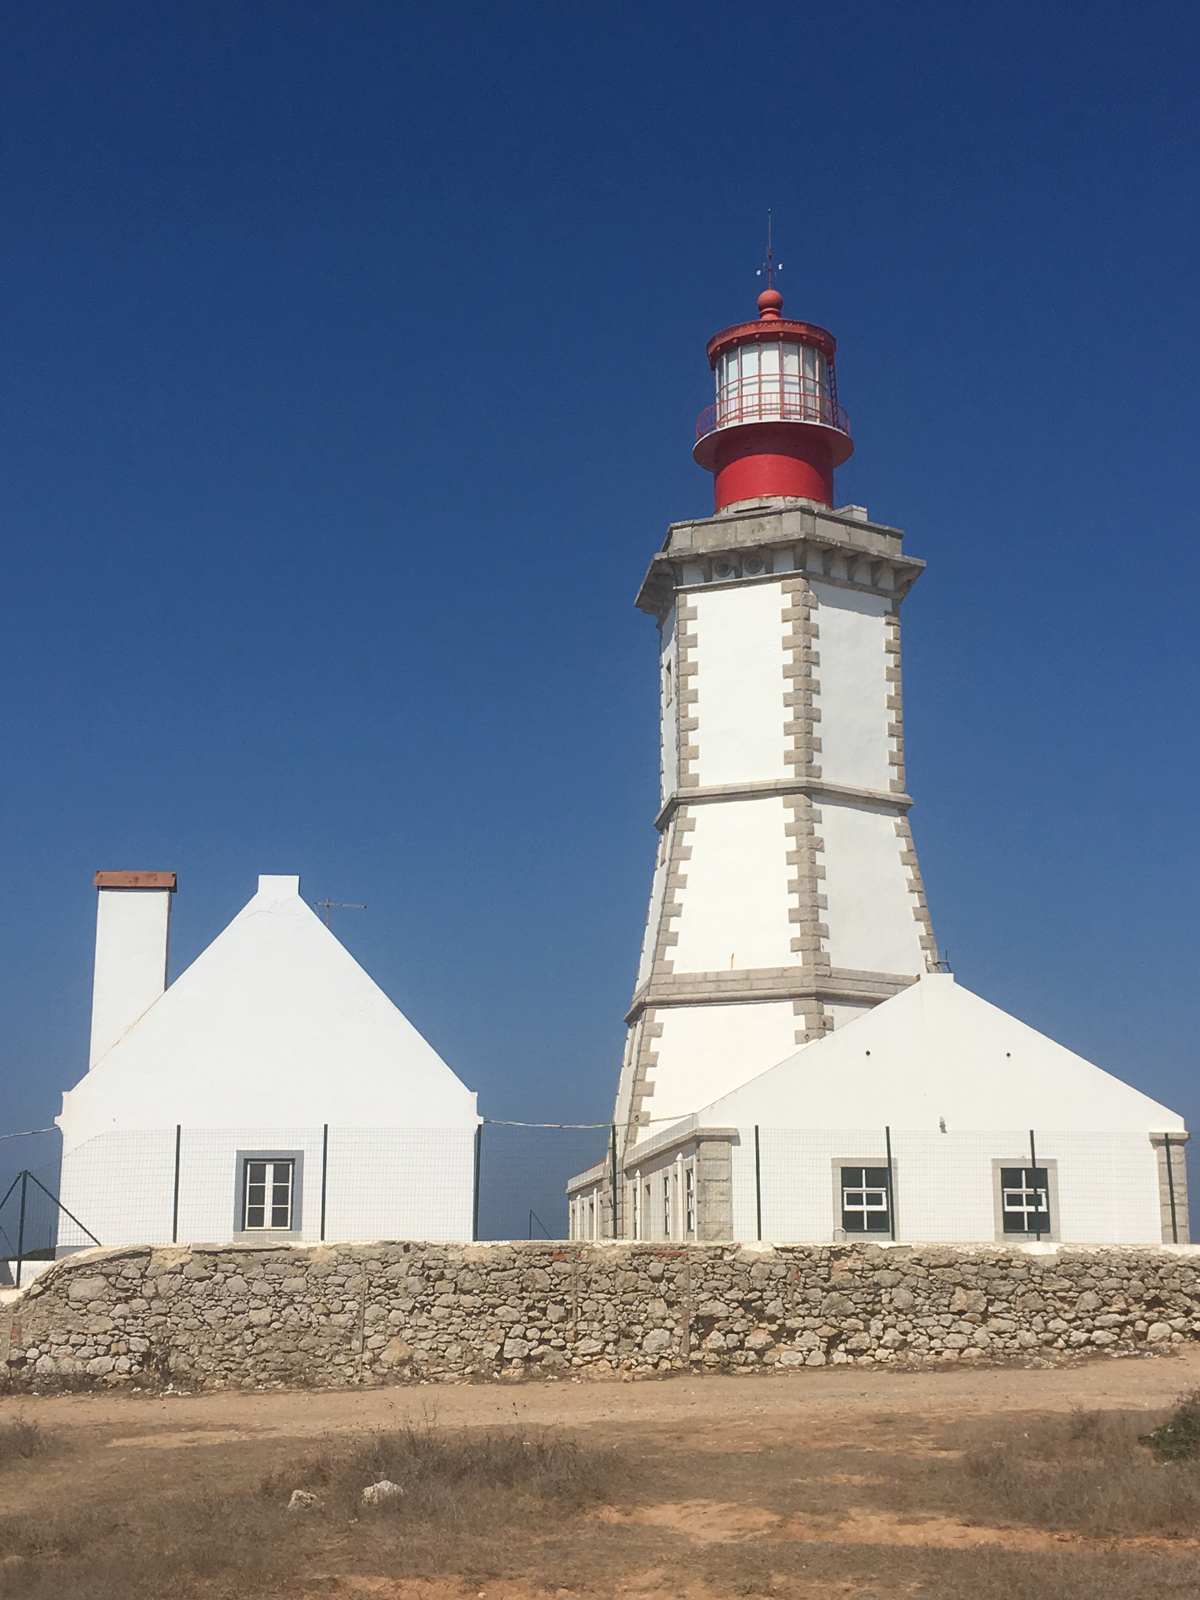 The lighthouse at Cape Espichel